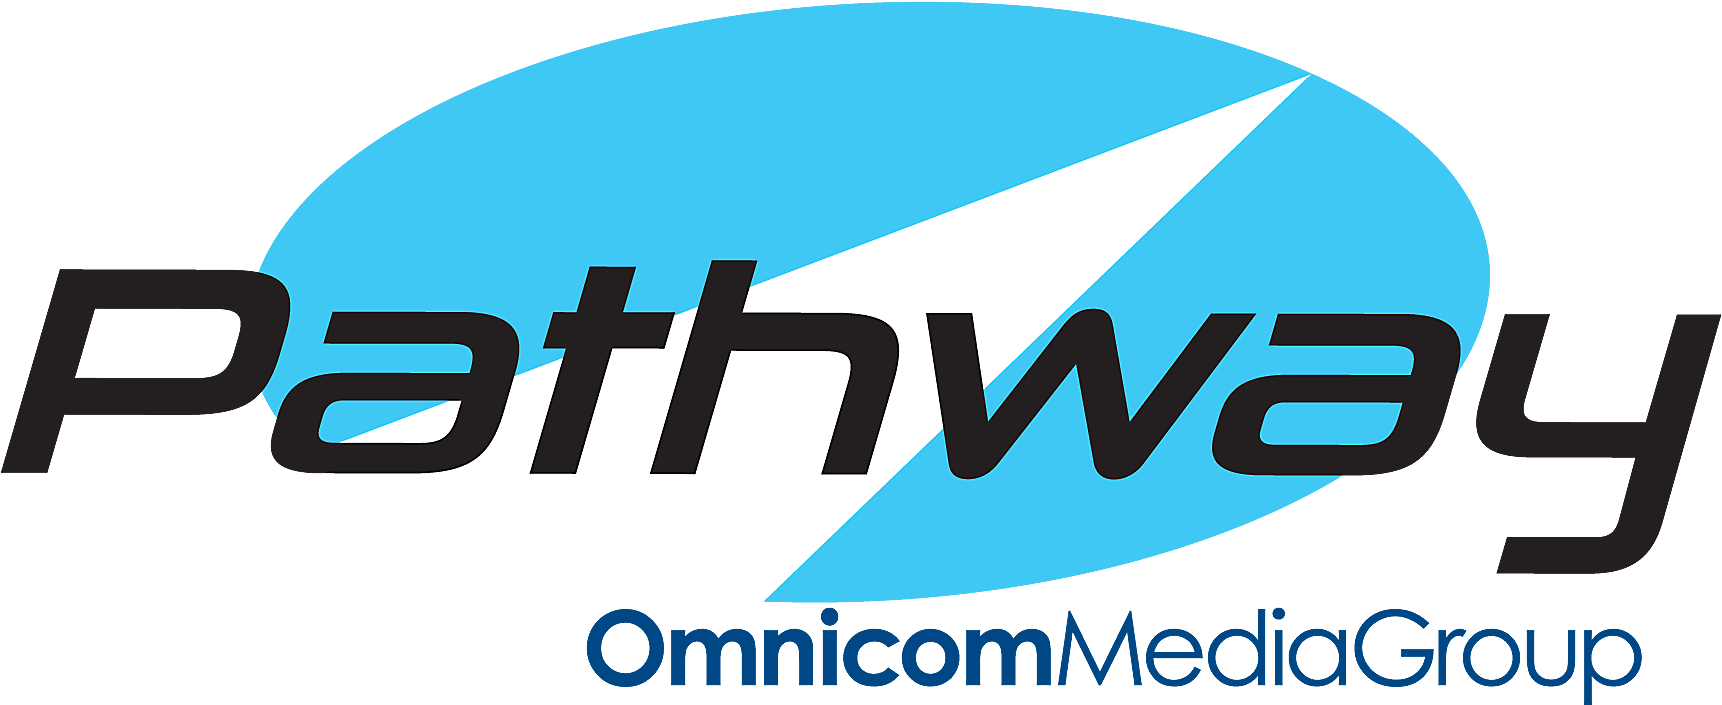 Pathway, A Division Of Omnicom Media Group, Is A Growing - Pathway Omnicom Media Group Logo (1766x739)